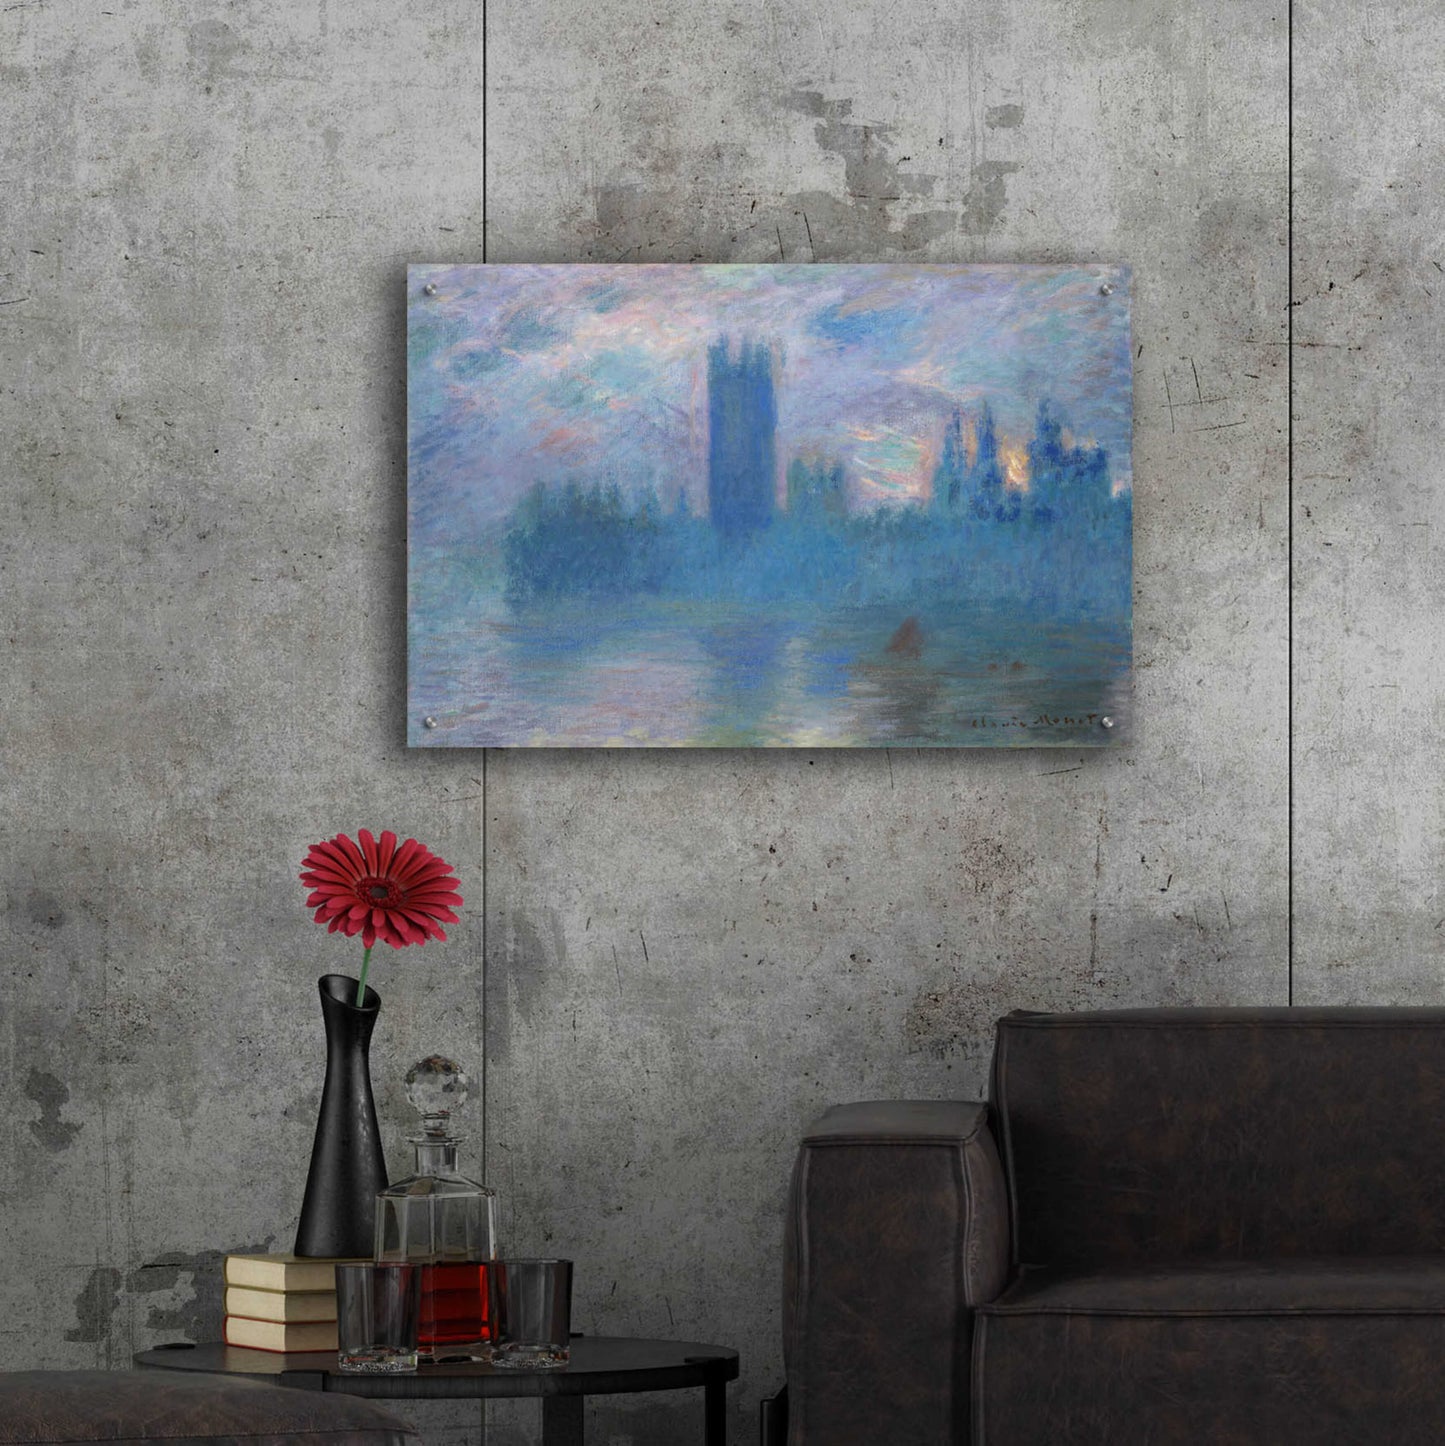 Epic Art 'Houses Of Parliament, London' by Claude Monet, Acrylic Glass Wall Art,36x24